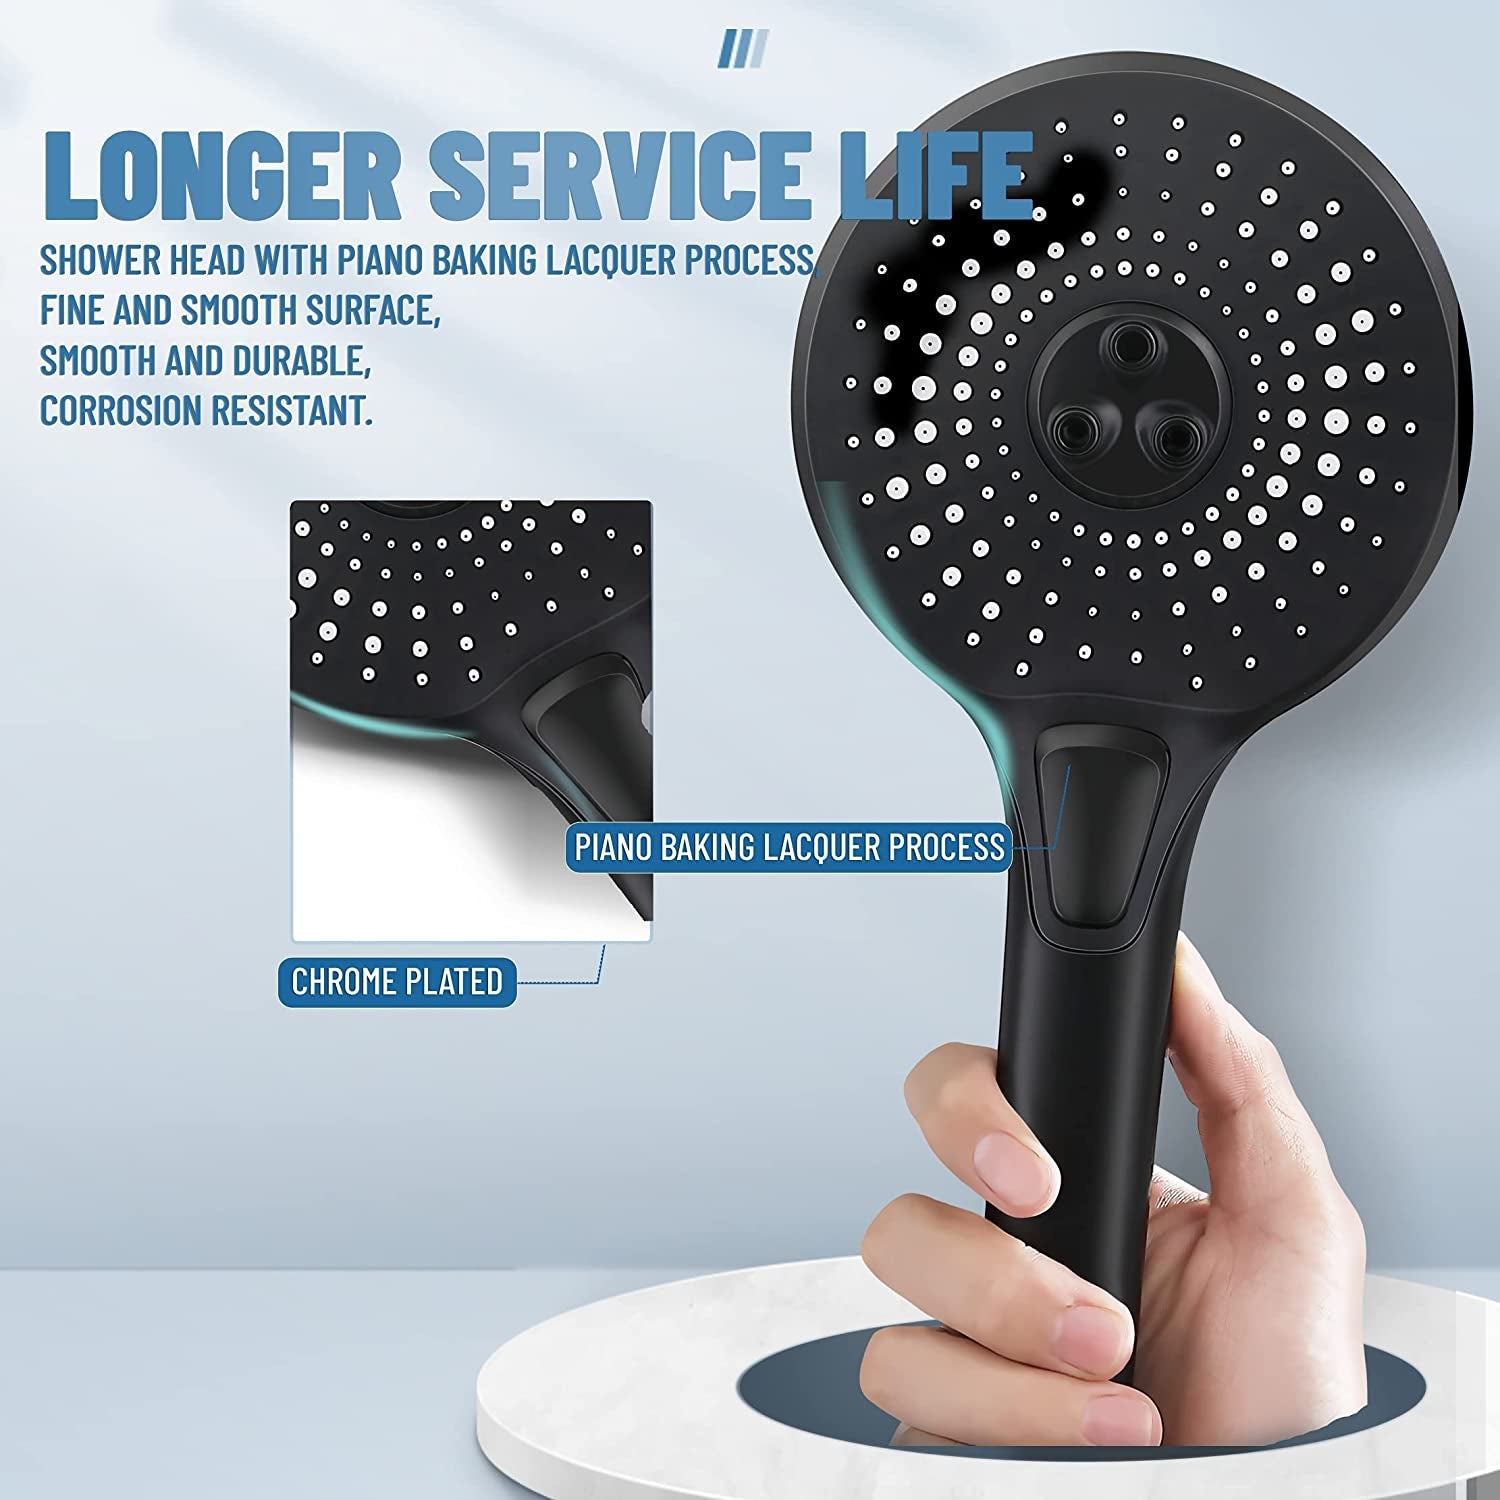 Luxurious High Pressure Handheld Shower Set with Multi-Shower Head and Long Stainless Hose - Enhance Your Shower Experience!